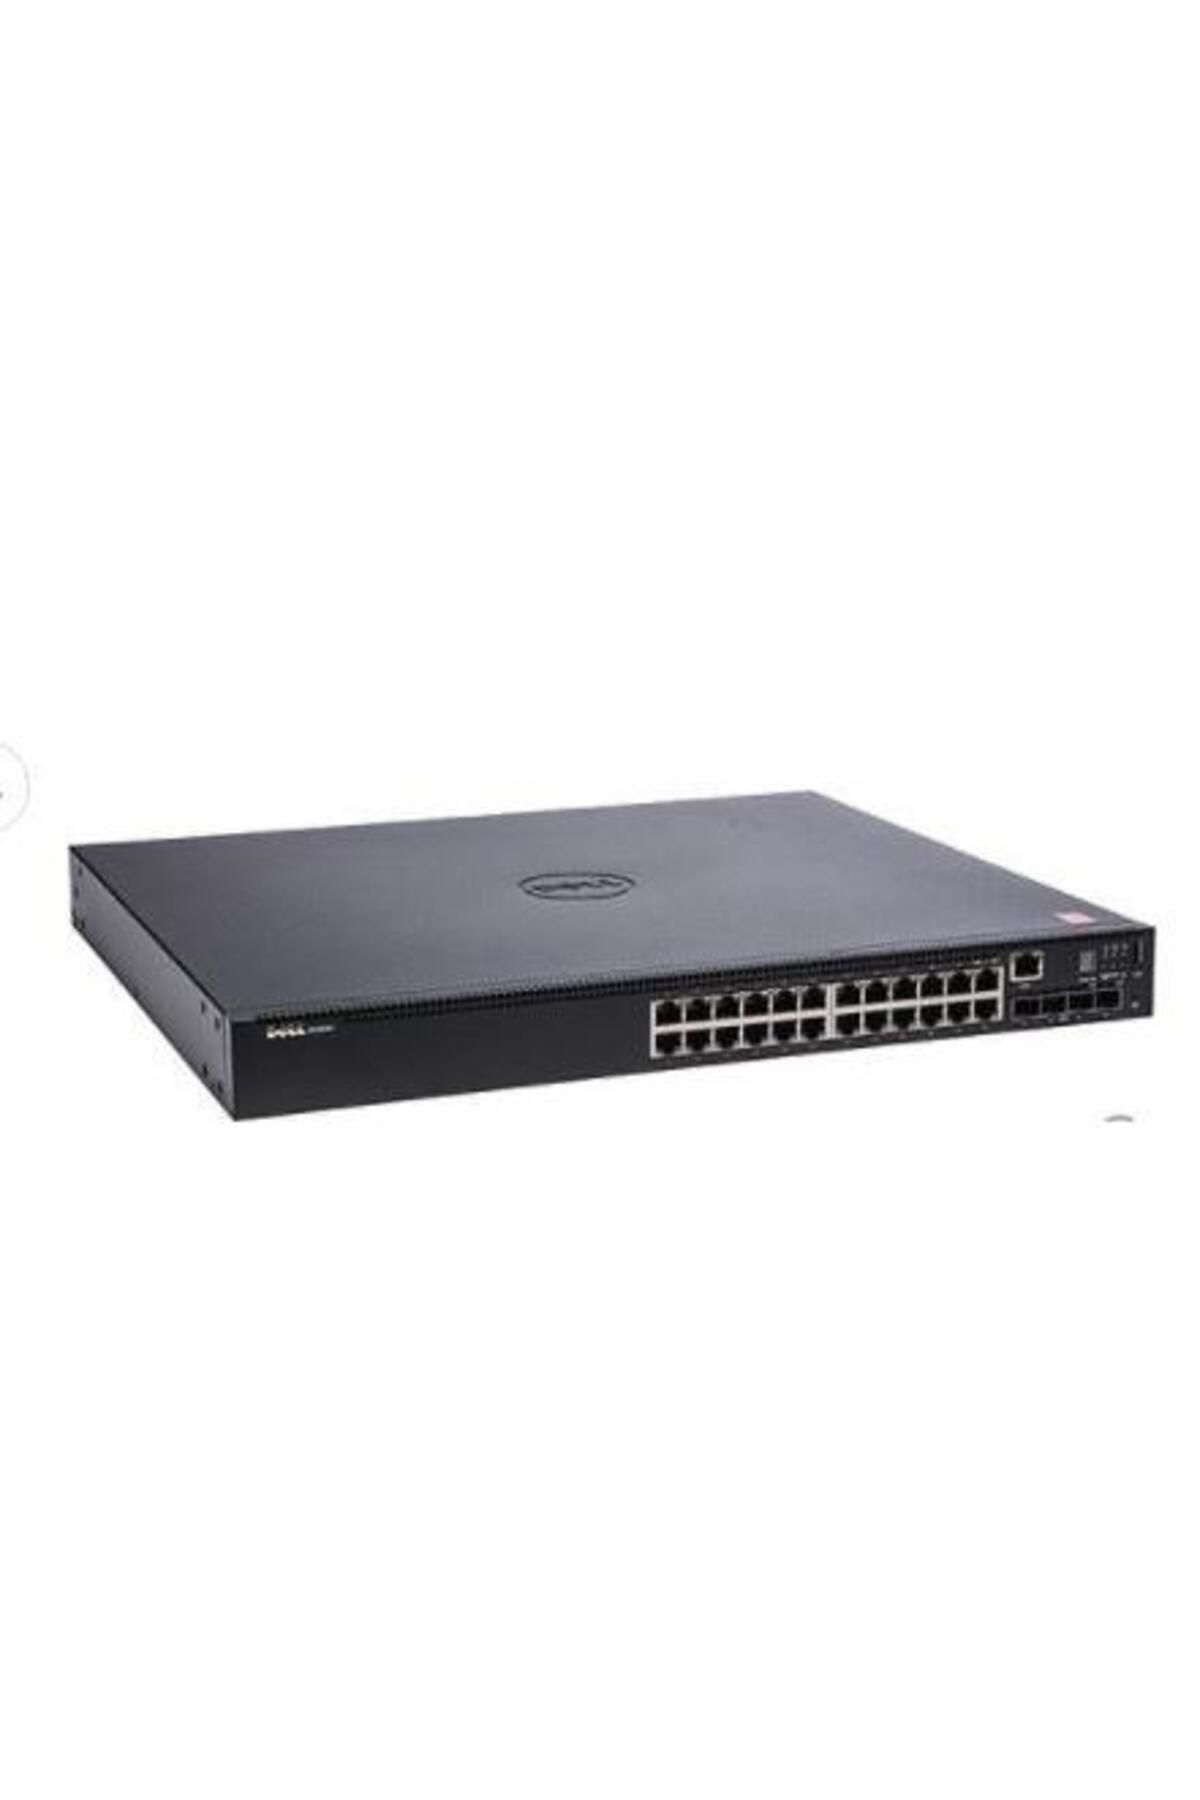 Dell Networking N1524p, Poe , 24x 1gbe 4x 10gbe Sfp Fixed Ports